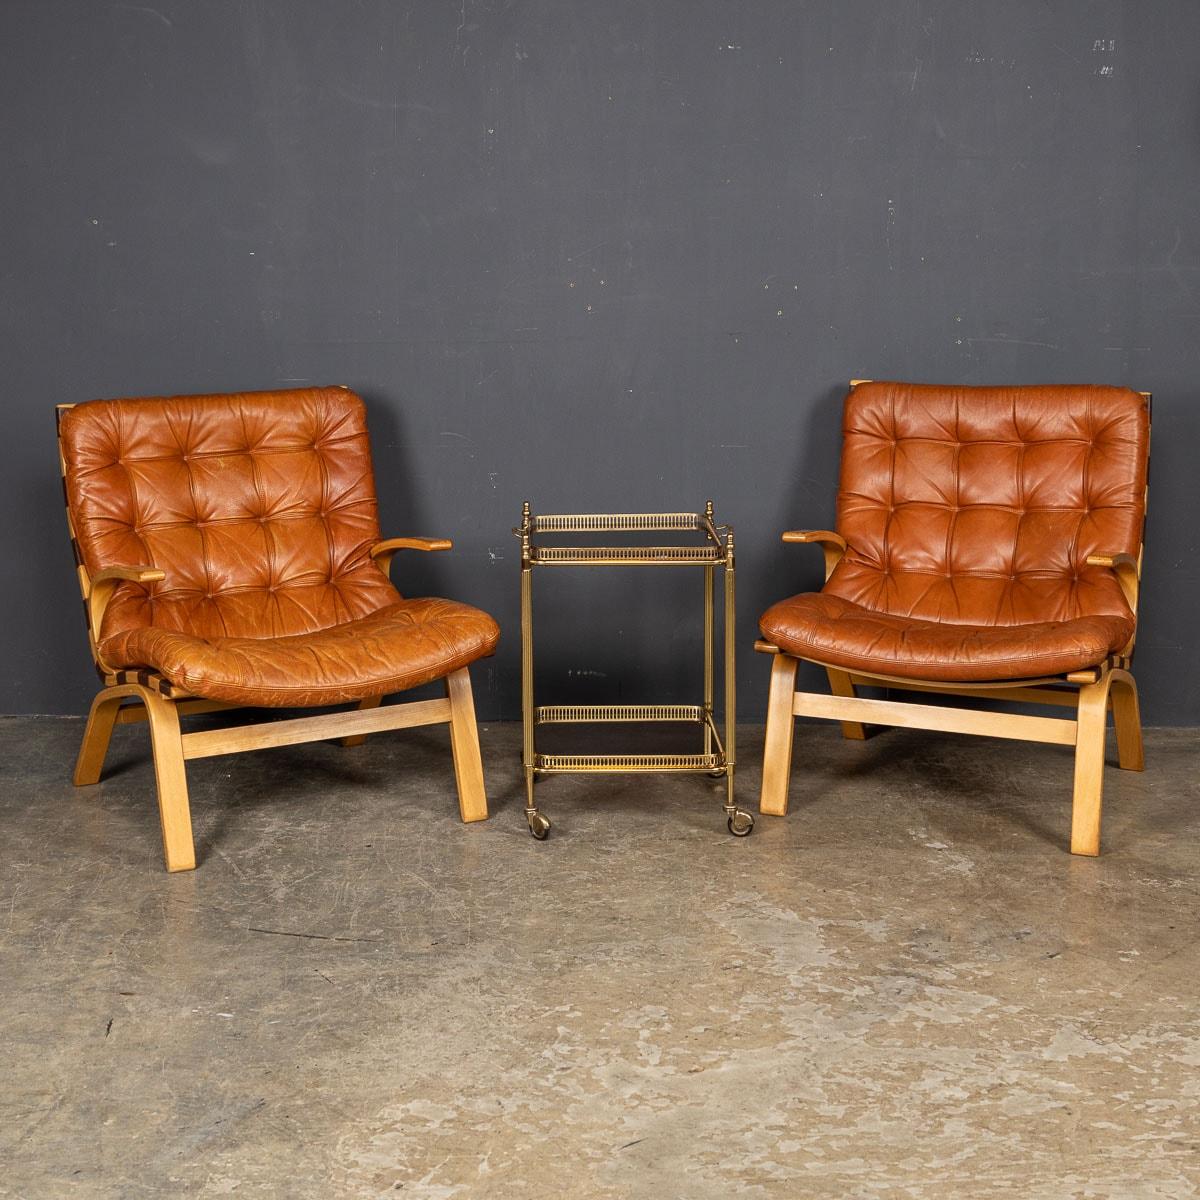 20th Century Danish Curved Beech Tan Leather Chairs By Farstrup Møbler, c.1970 In Good Condition In Royal Tunbridge Wells, Kent